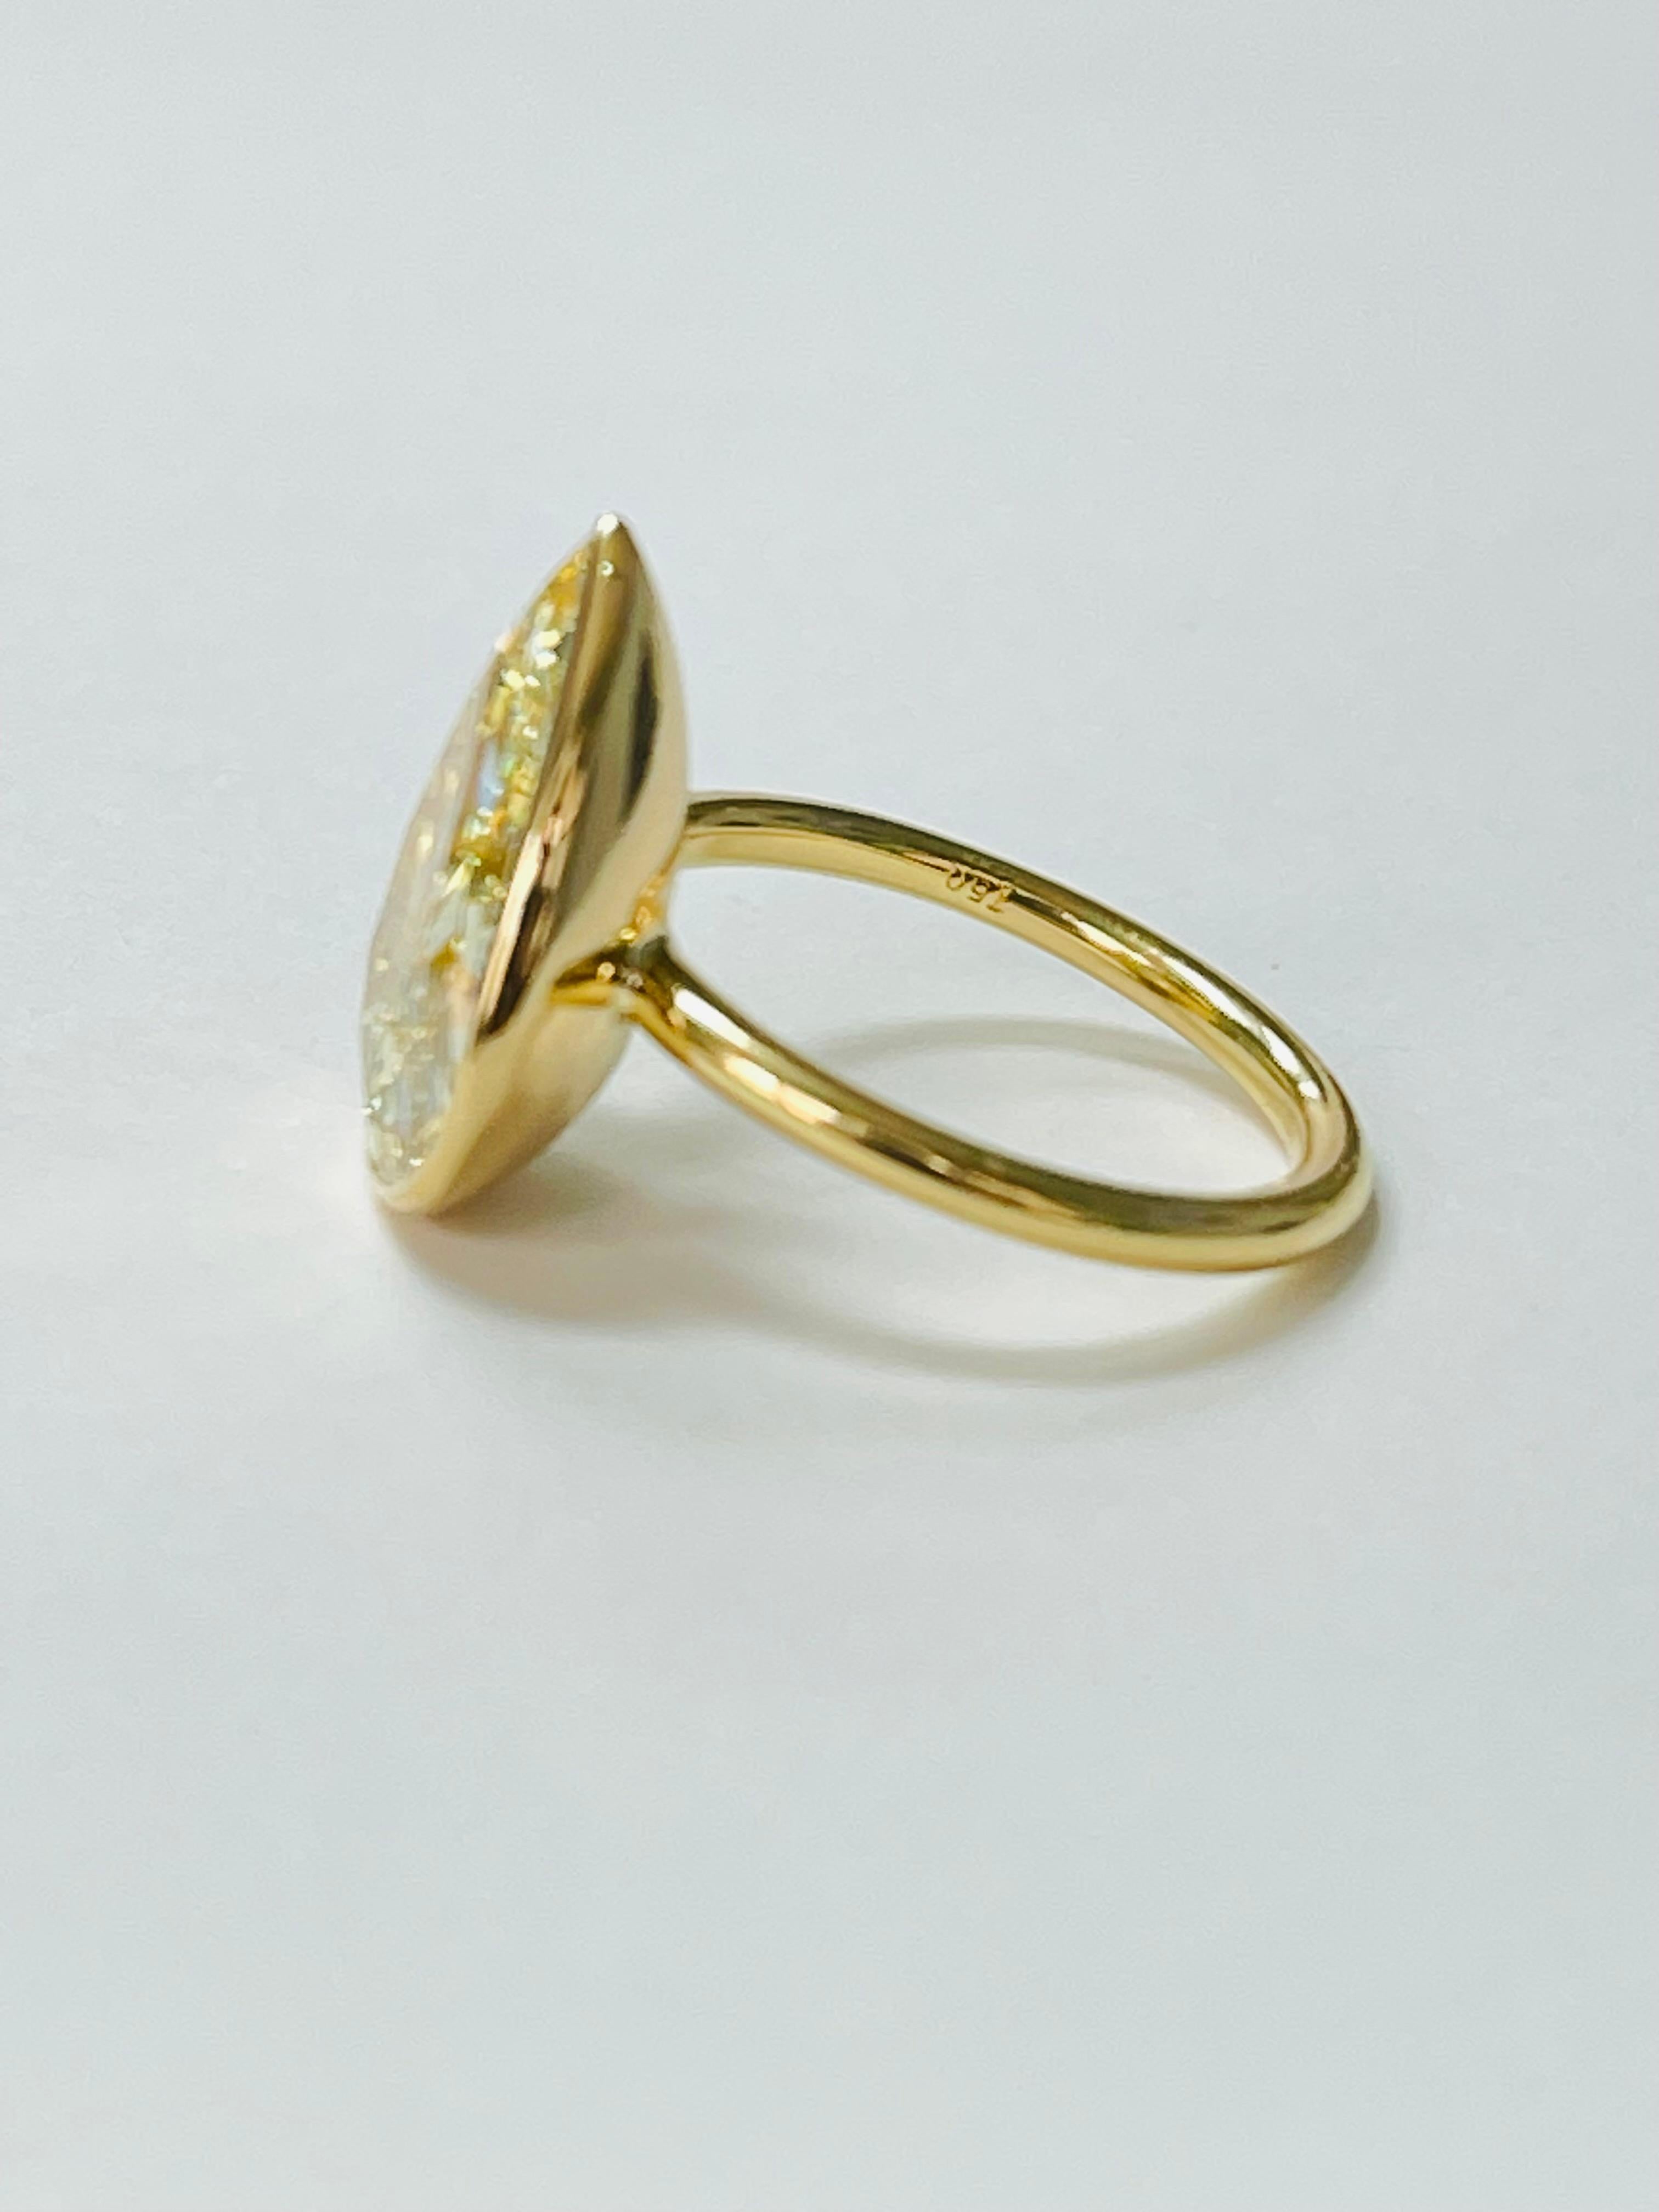 GIA Certified Fancy Yellow Pear Shape Diamond Ring in 18k Yellow Gold In New Condition For Sale In New York, NY